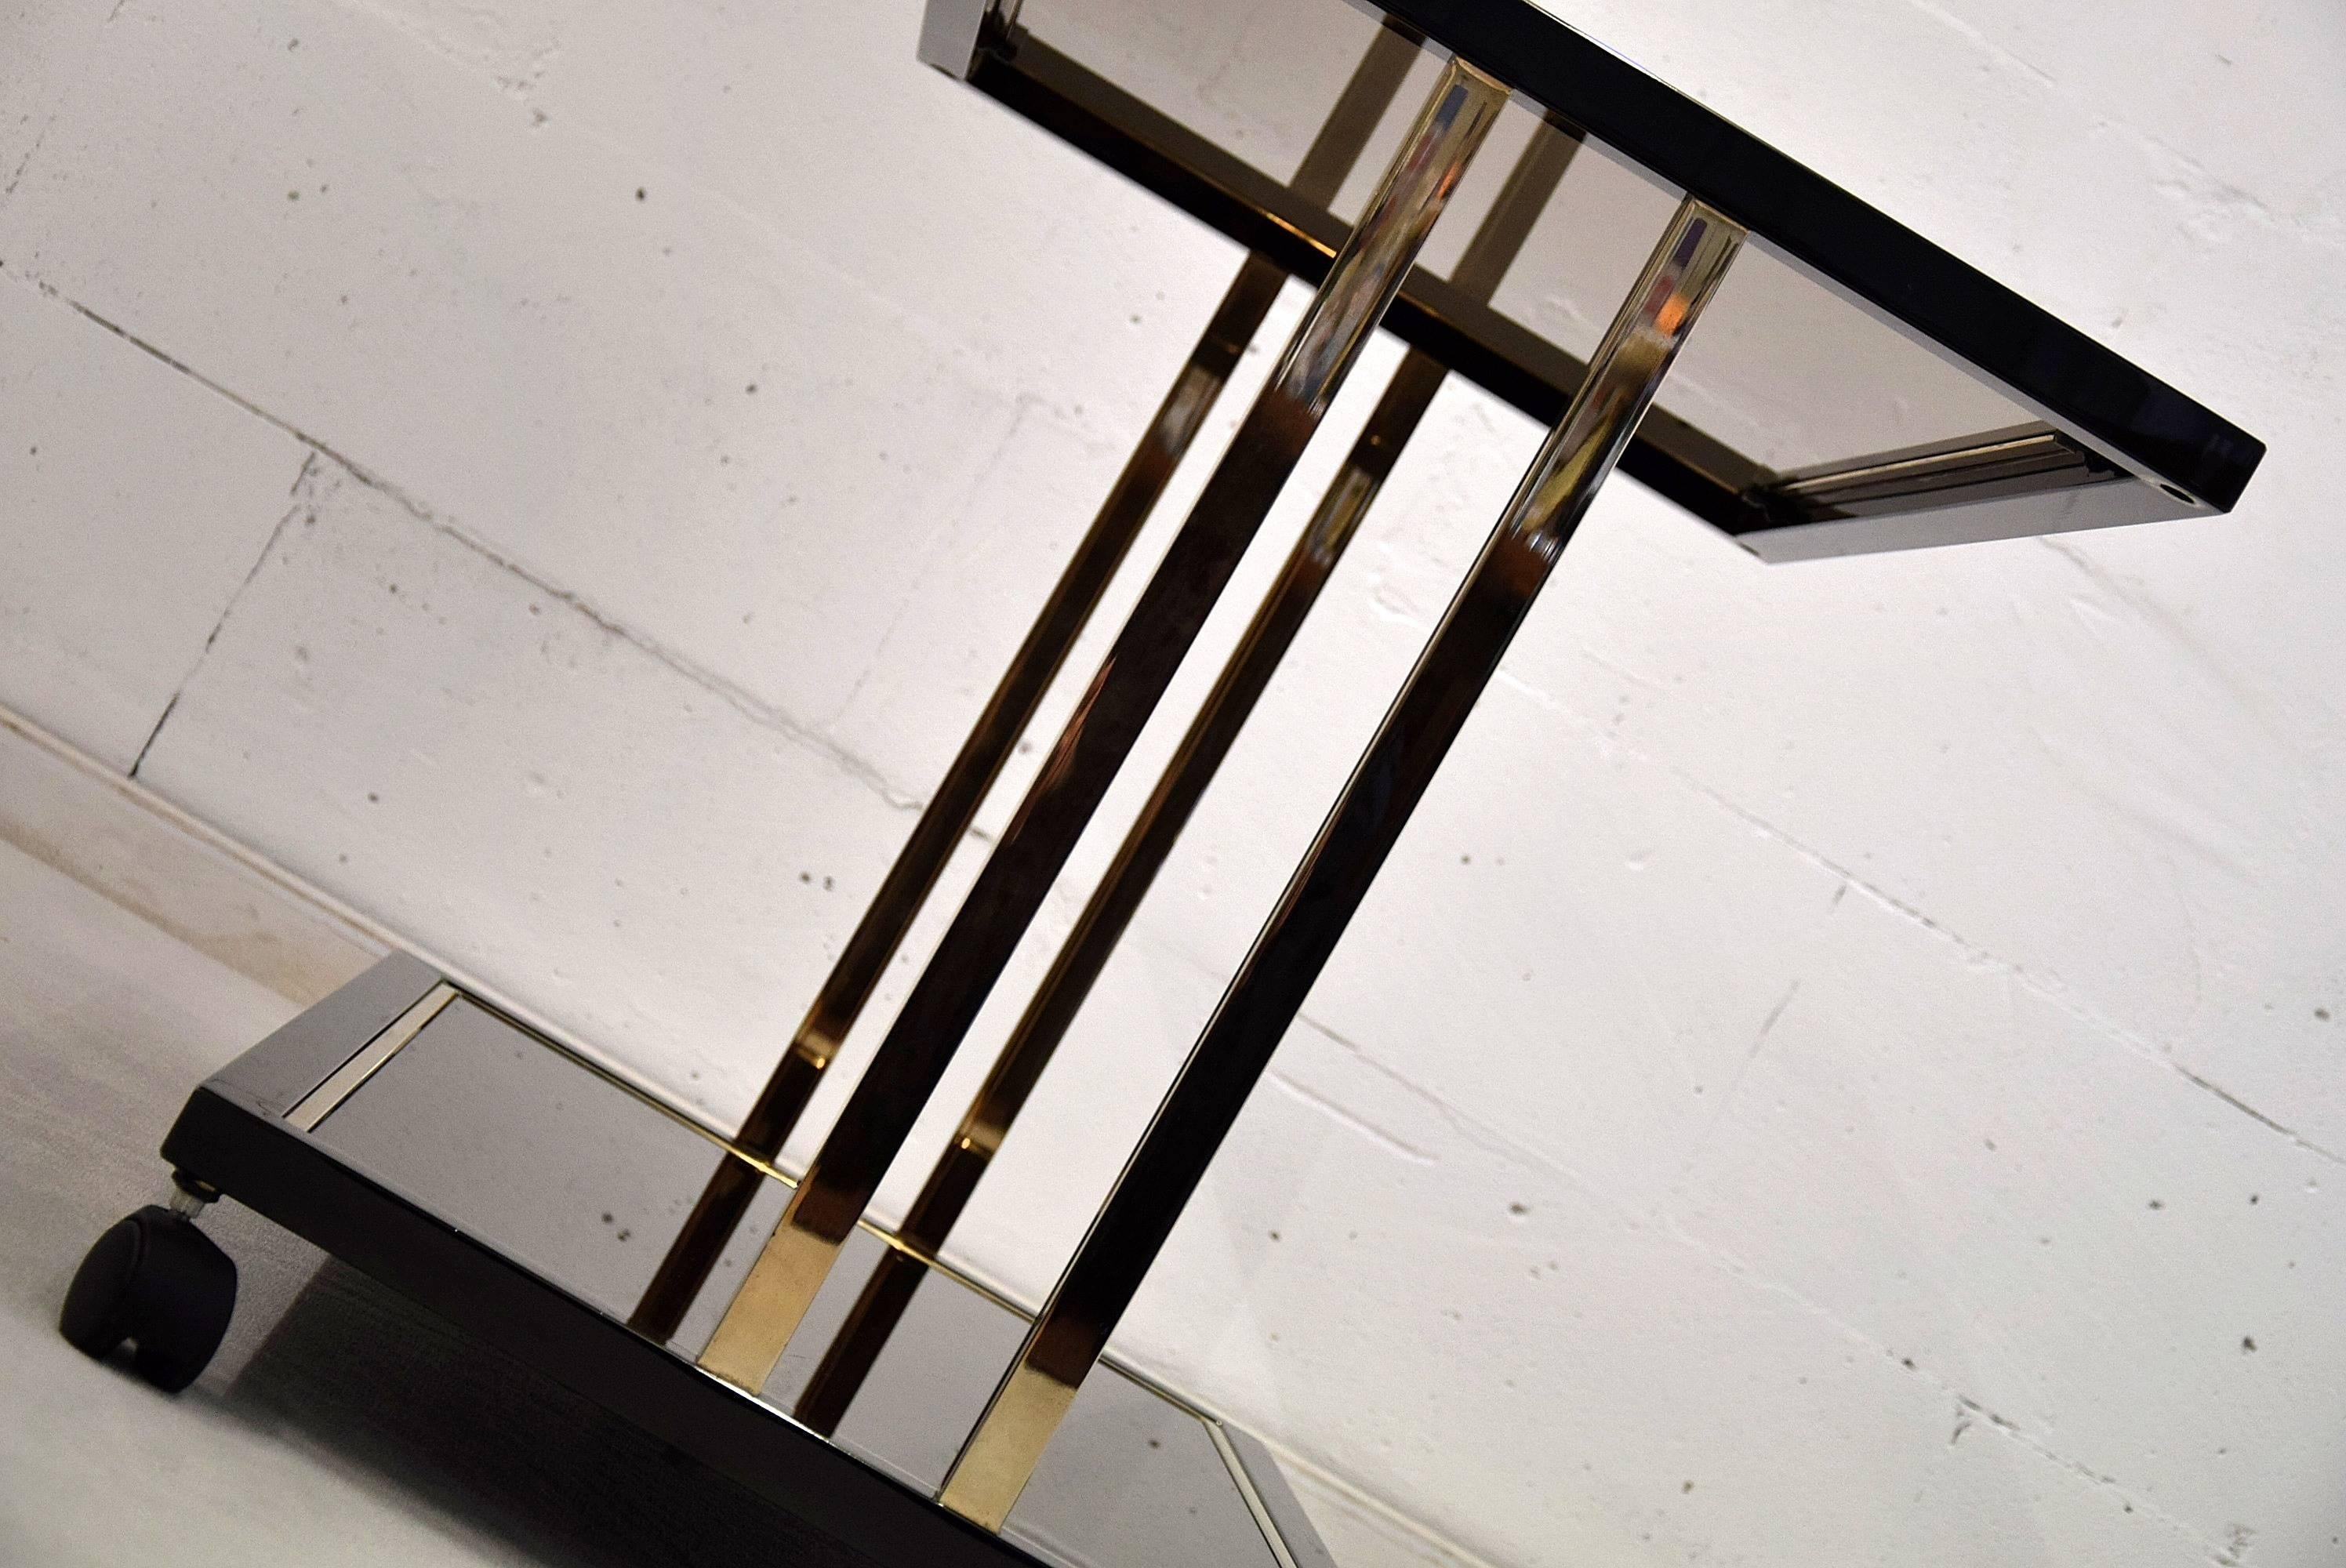 Two-tier Mid-century modern Belgo chrome serving table
Stylish 23-carat gold plated two tier serving table or bar cart produced by Belgo Chrome in the 1980s.

The top has fume smoked glass and the bottom tier bronze mirrored glass with a small